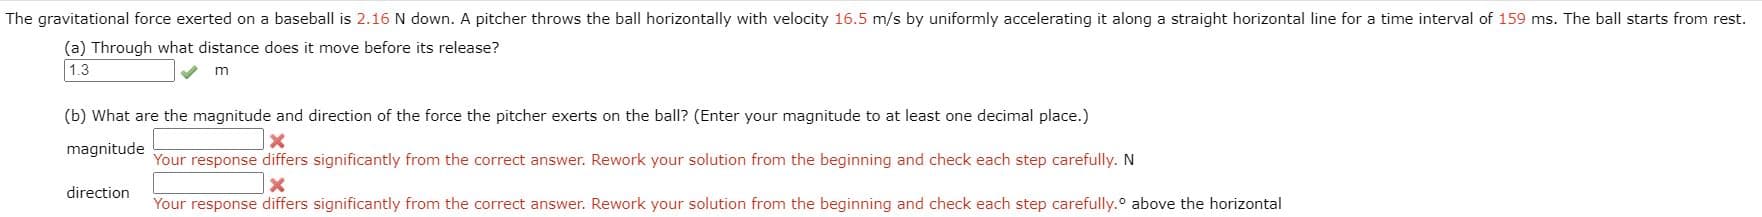 The gravitational force exerted on a baseball is 2.16 N down. A pitcher throws the ball horizontally with velocity 16.5 m/s by uniformly accelerating it along a straight horizontal line for a time interval of 159 ms. The ball starts from rest
(a) Through what distance does it move before its release?
1.3
(b) What are the magnitude and direction of the force the pitcher exerts on the ball? (Enter your magnitude to at least one decimal place.)
magnitude
Your response differs significantly from the correct answer. Rework your solution from the beginning and check each step carefully. N
direction
